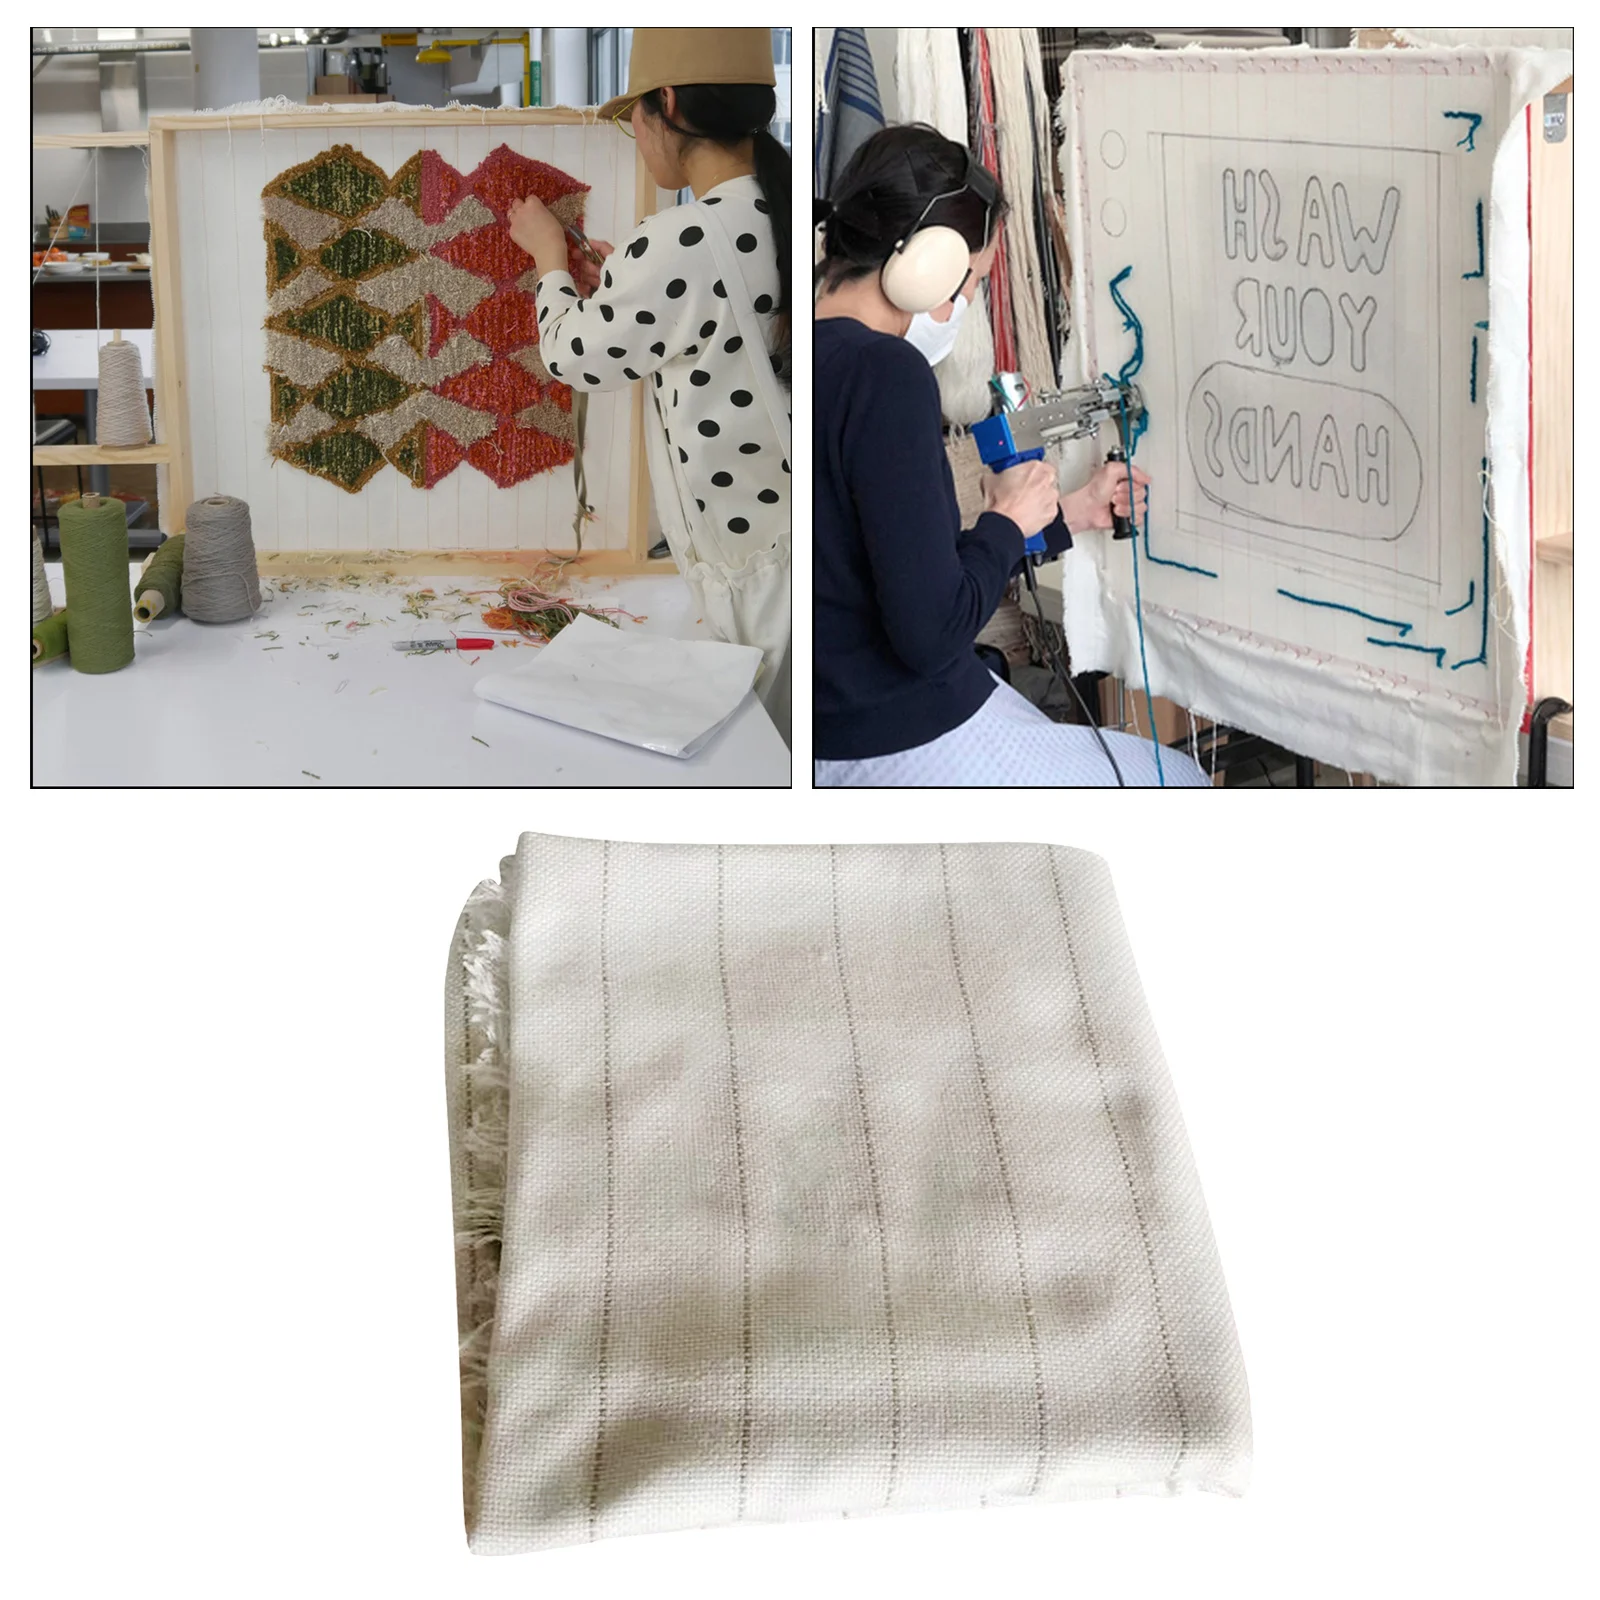 5 x 8 Ft. Punch Needle Cloth Y-Axis Monks Cloth with Marked Lines for Rugs Tufting Embroidery with 2 Fabric Marker Pens